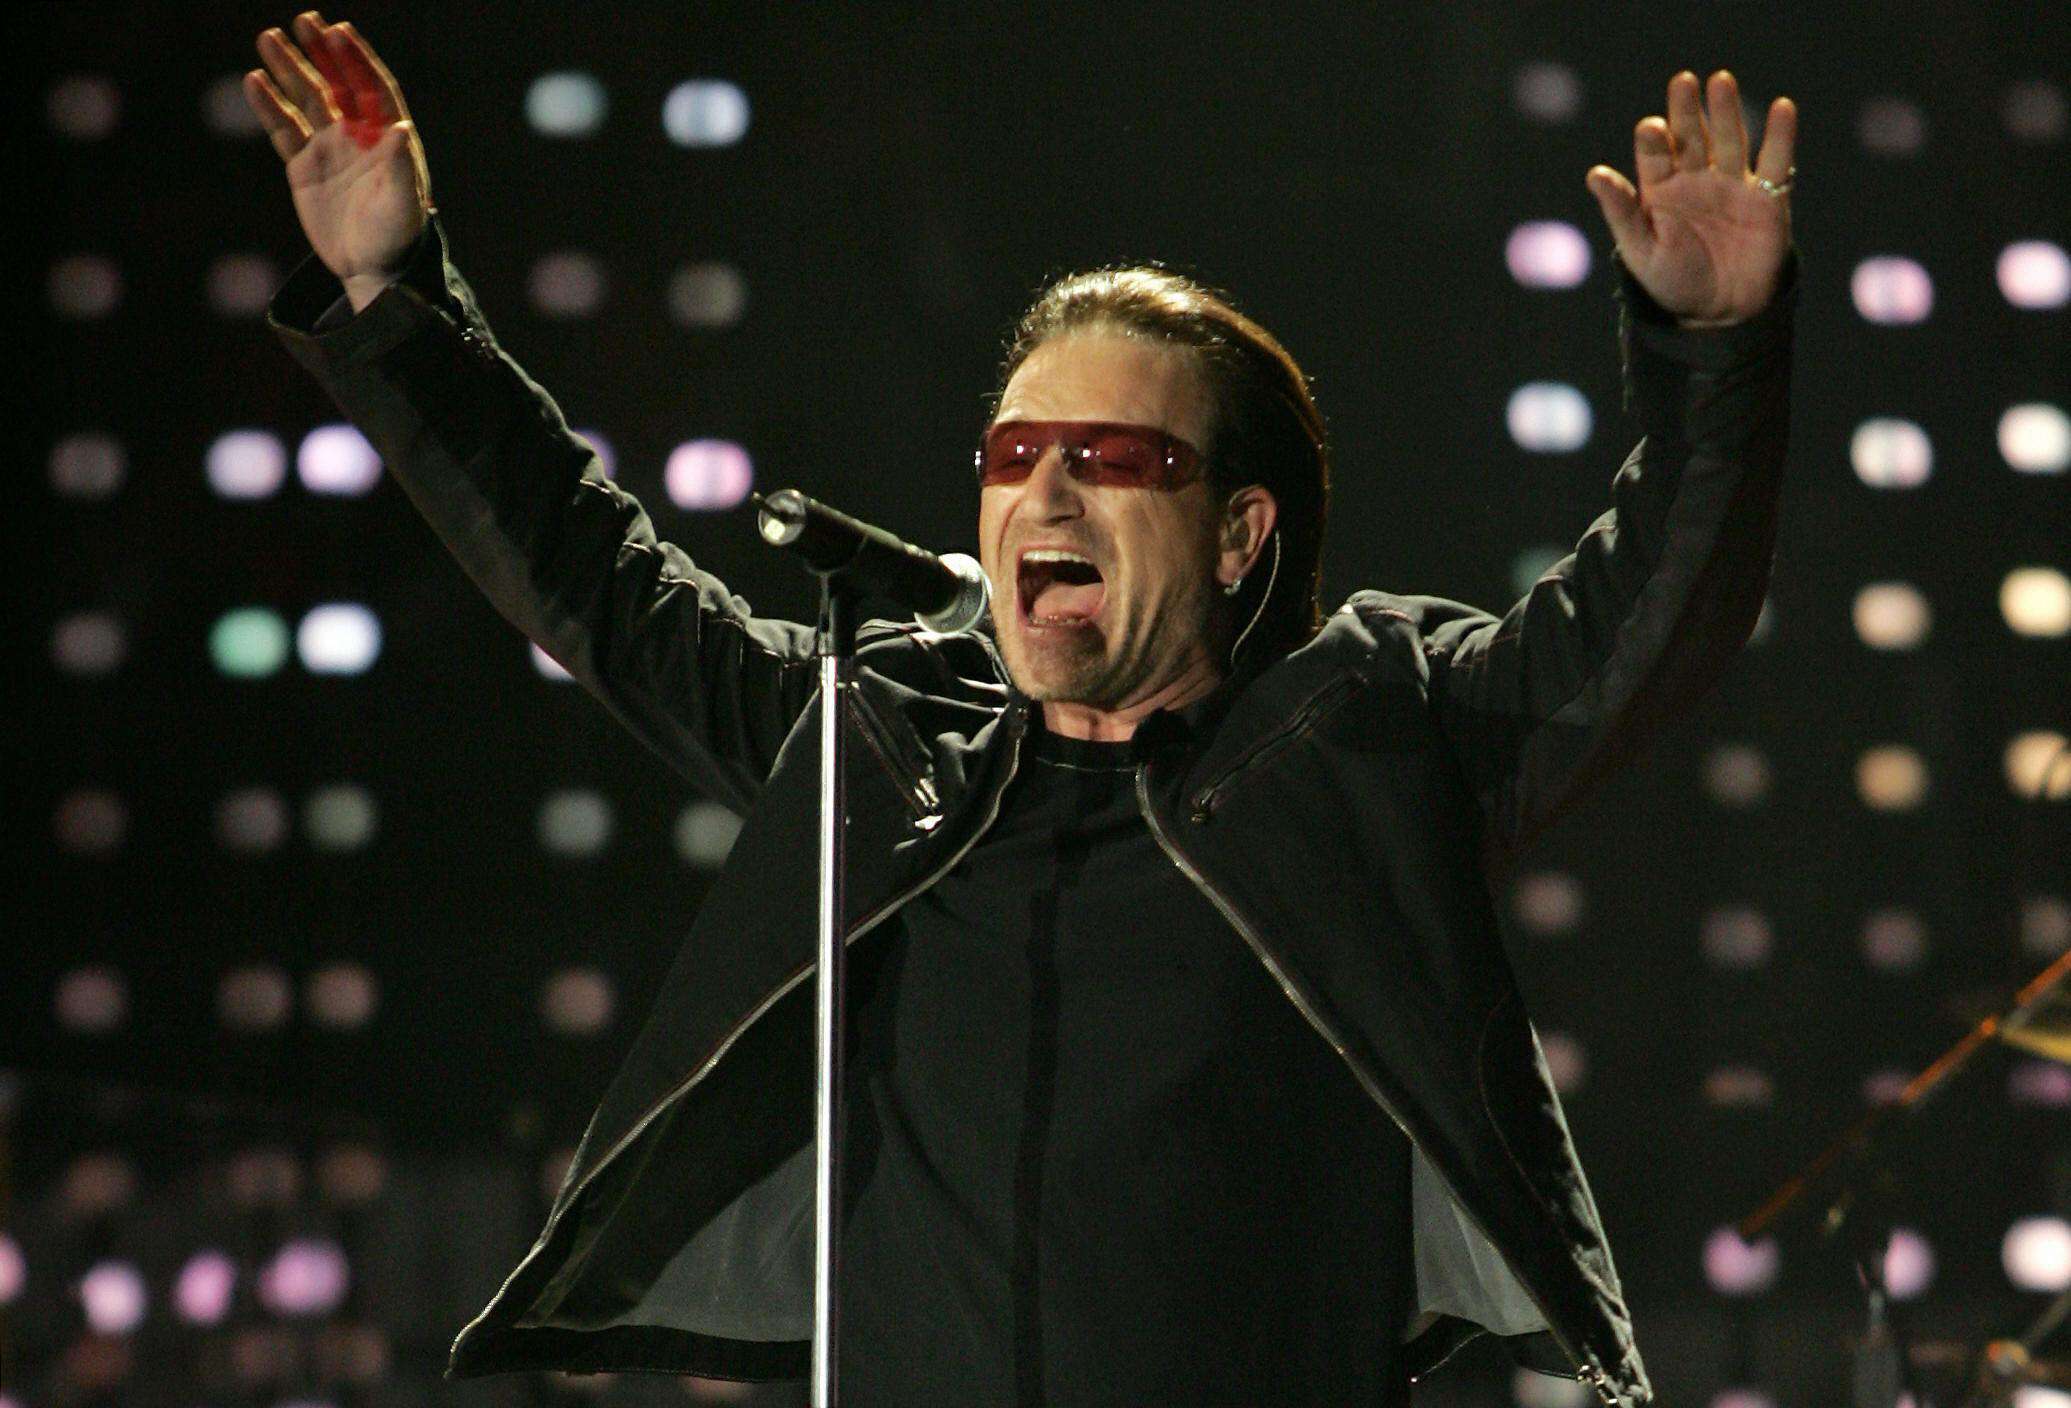 Bono Musician (Embed only)